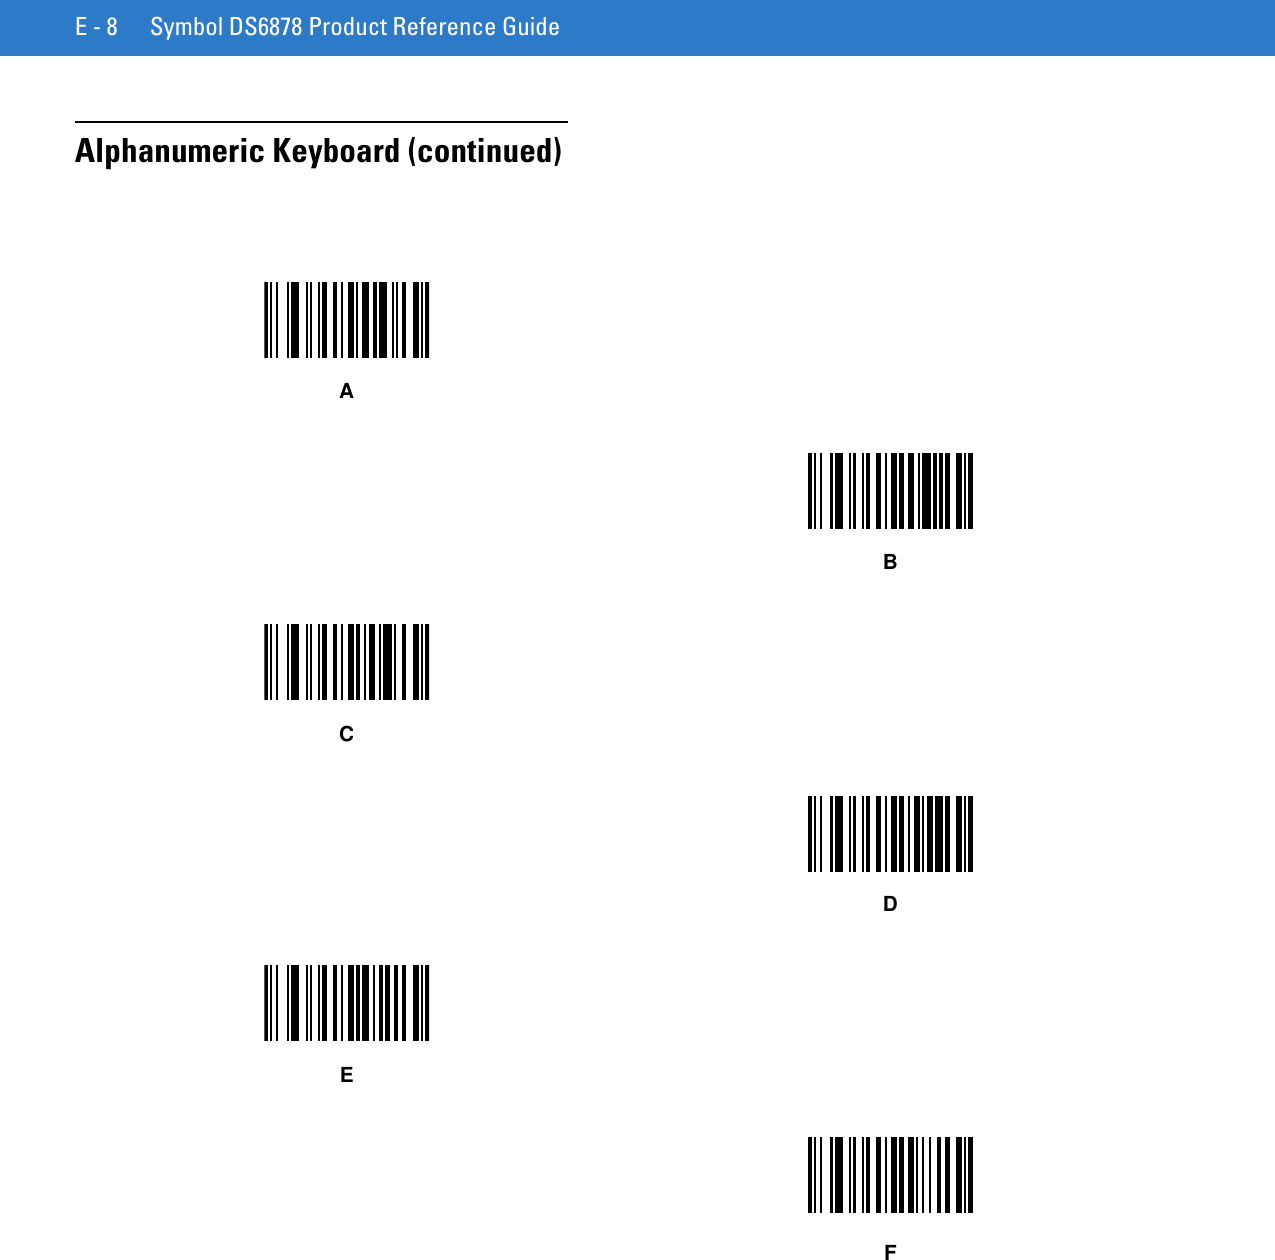 E - 8 Symbol DS6878 Product Reference GuideAlphanumeric Keyboard (continued)ABCDEF